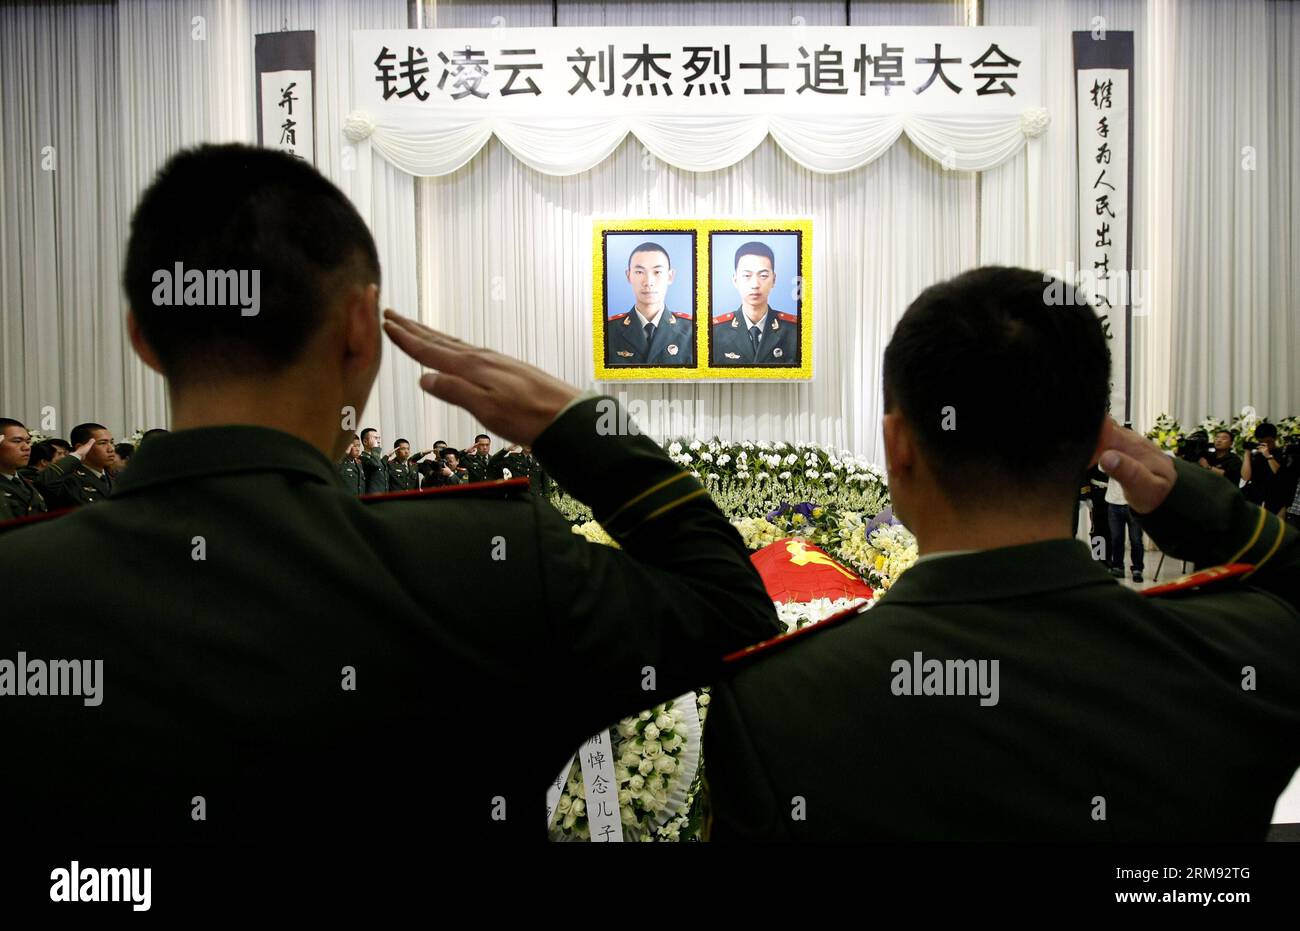 (140505) -- SHANGHAI, May 5, 2014 (Xinhua) -- Firefighters salute as they mourn for Qian Lingyun and Liu Jie, two young Chinese firefighters who fell to their death during a blaze in a highrise building, at a memorial meeting in Shanghai, east China, May 5, 2014. Qian Lingyun and Liu Jie, who were born in 1991 and 1994 respectively, died on May 3 while responding to the fire in an apartment on the 13th floor of the building where a sudden blast occurred and the force blew them through an open window. (Xinhua/Fang Zhe) (lfj) CHINA-SHANGHAI-YOUNG FIREFIGHTERS-MOURNING (CN) PUBLICATIONxNOTxINxCHN Stock Photo